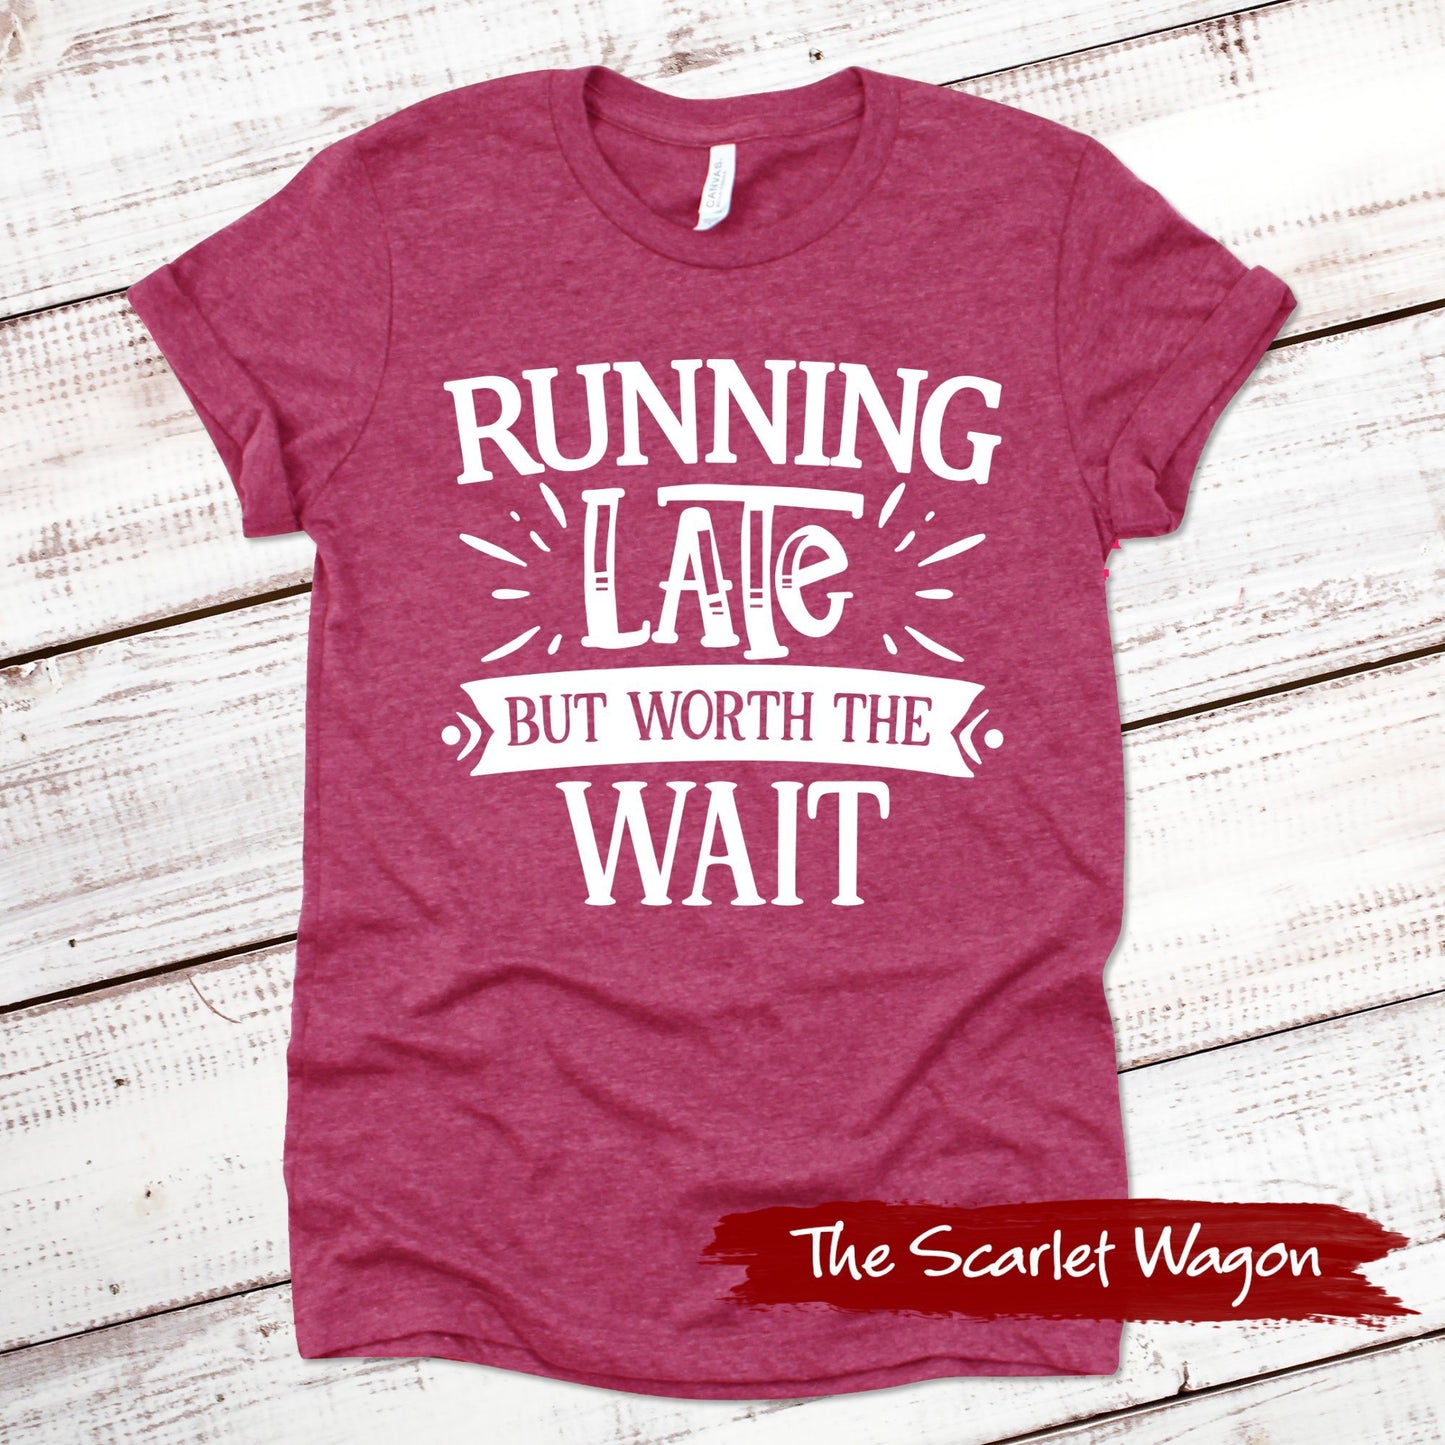 Running Late But Worth the Wait Funny Shirt Scarlet Wagon Heather Raspberry XS 